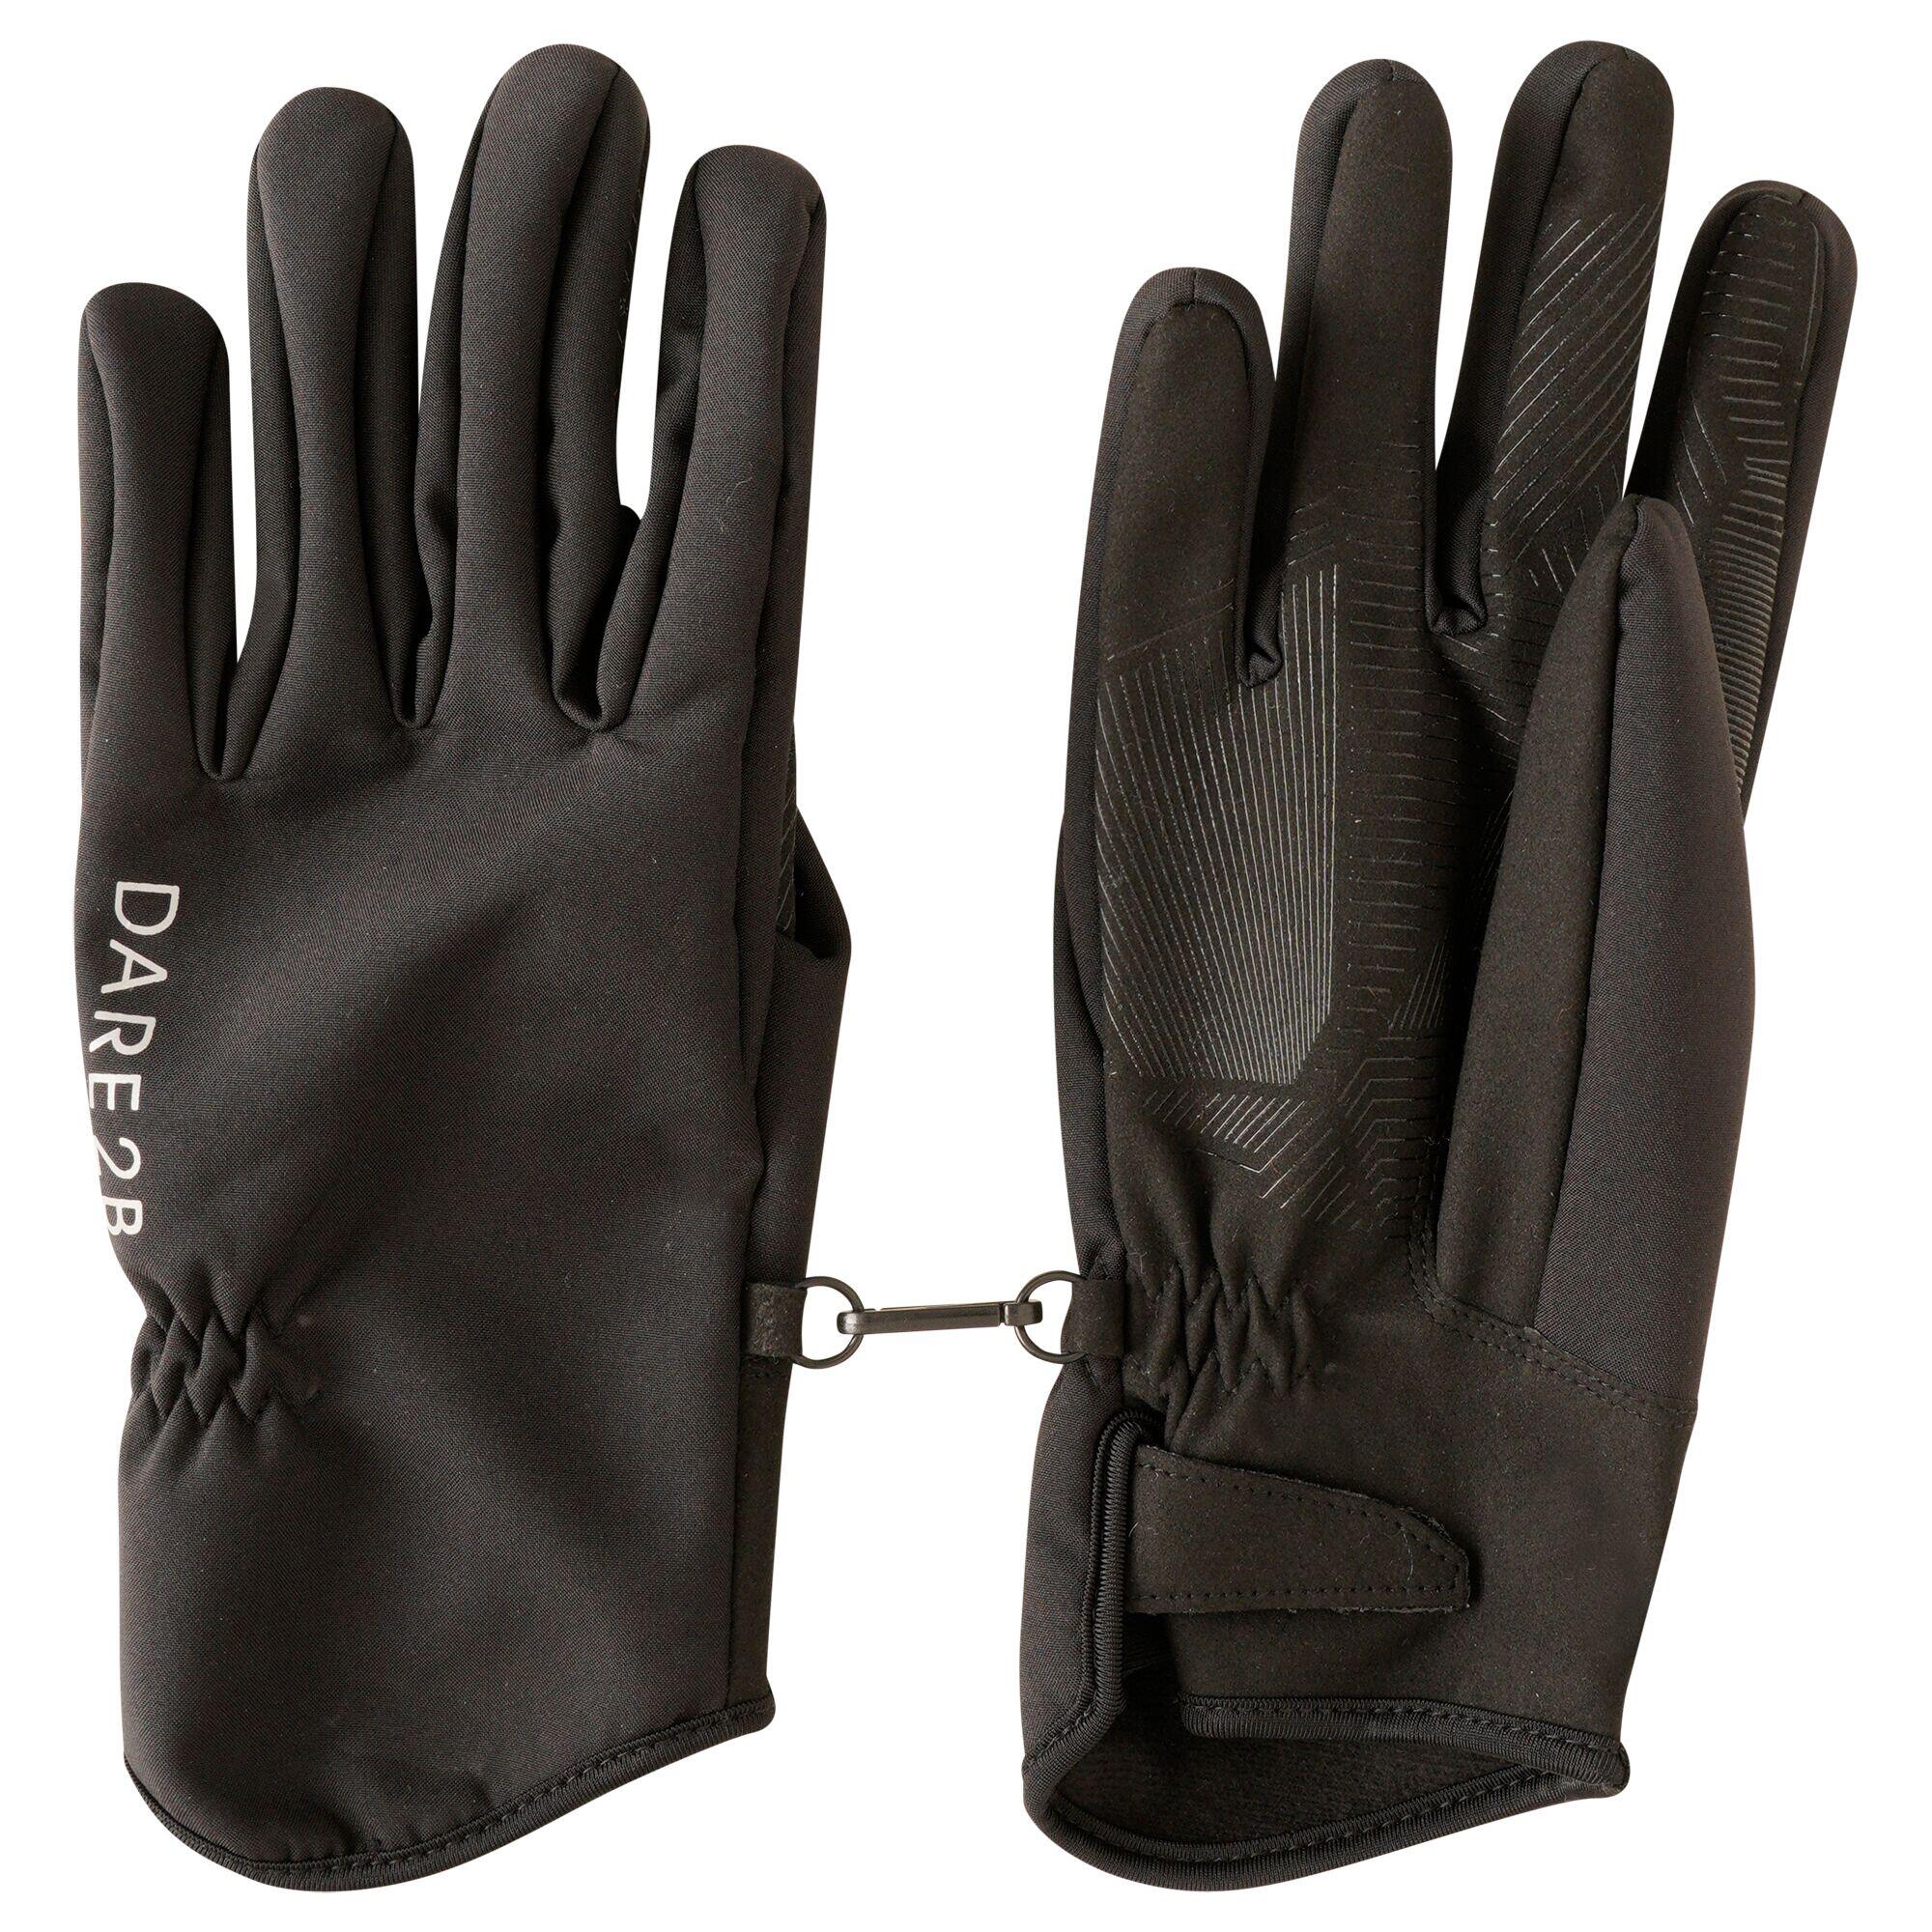 Pertent Adults' Cycling Gloves 1/4